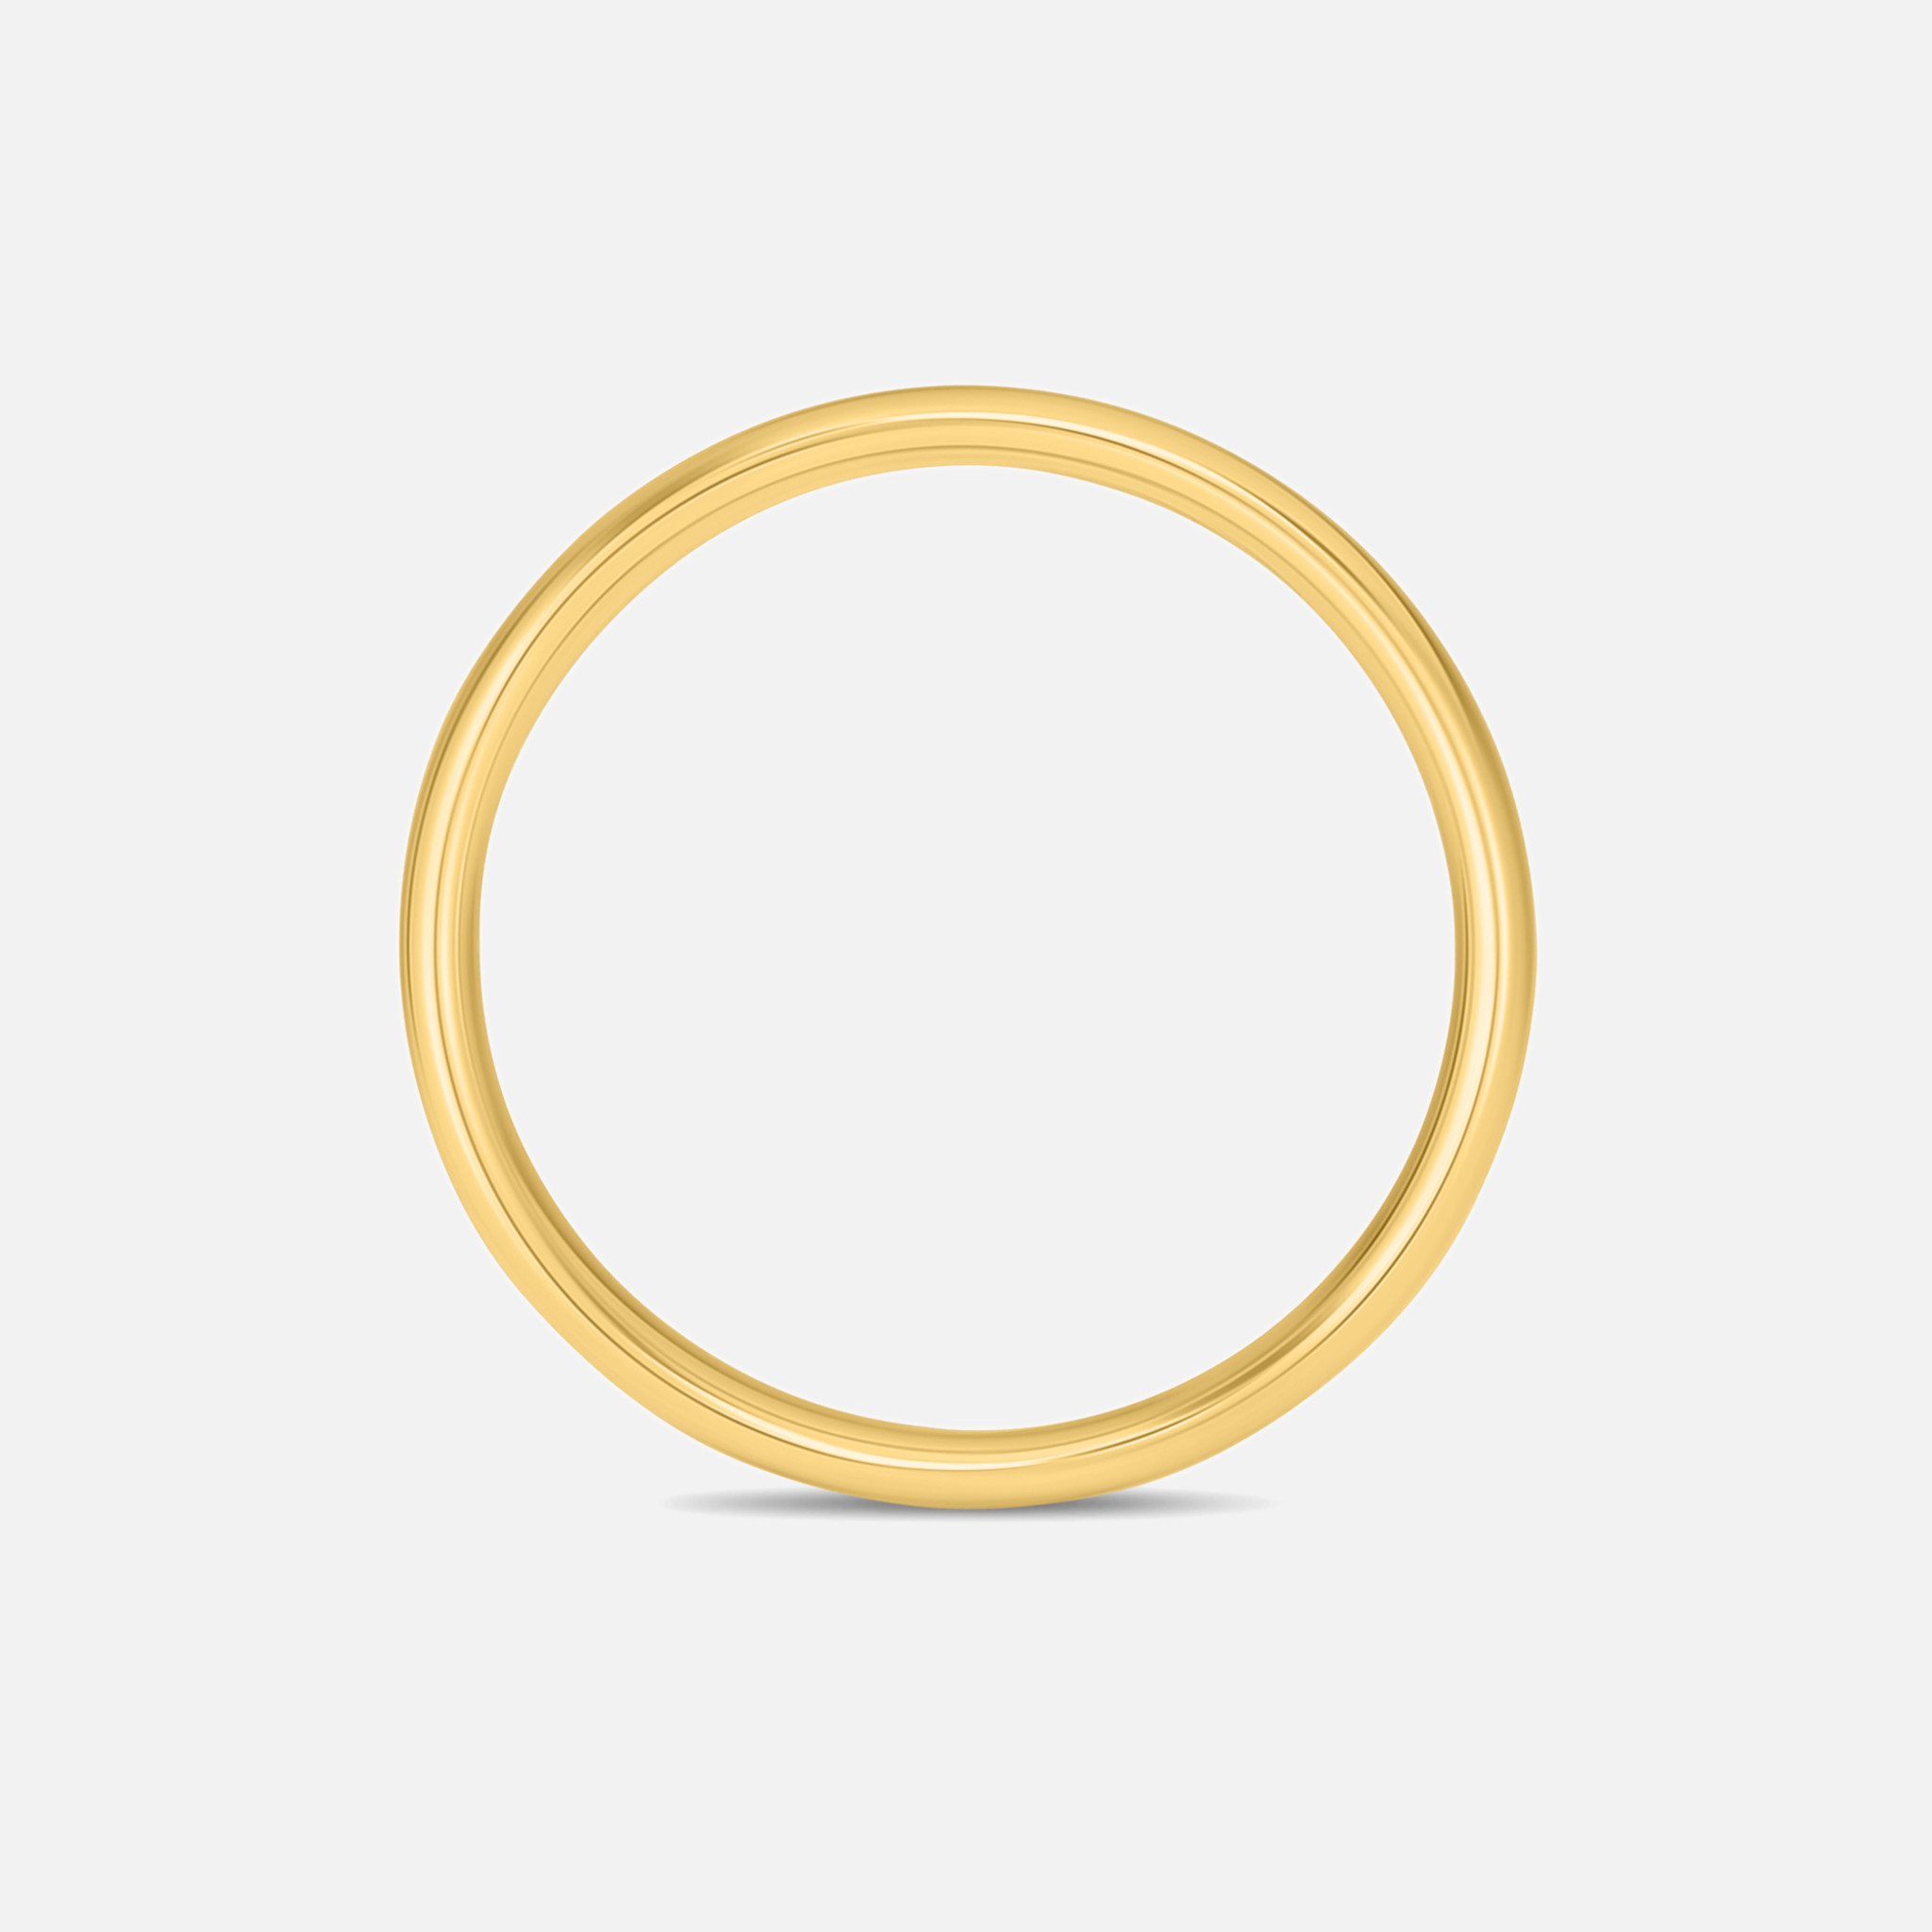 Crafted from 14k gold, this thin wedding band will give any special moment a cool, contemporary edge.